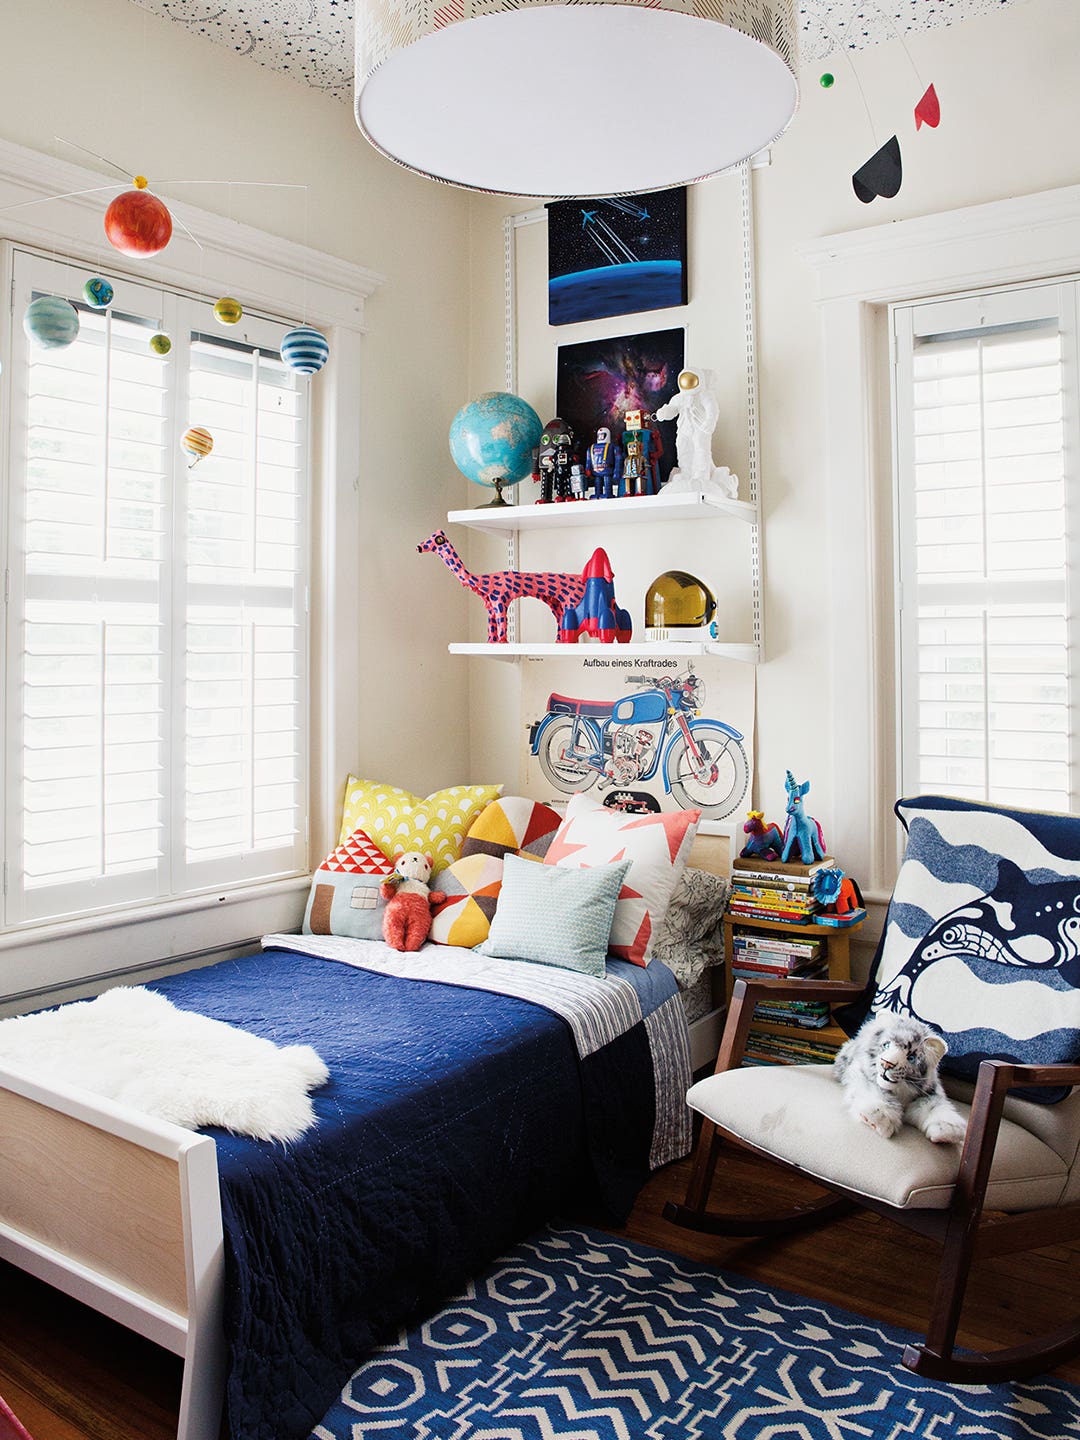 So Your Kid Wants Their Bedroom to Resemble a Spaceship